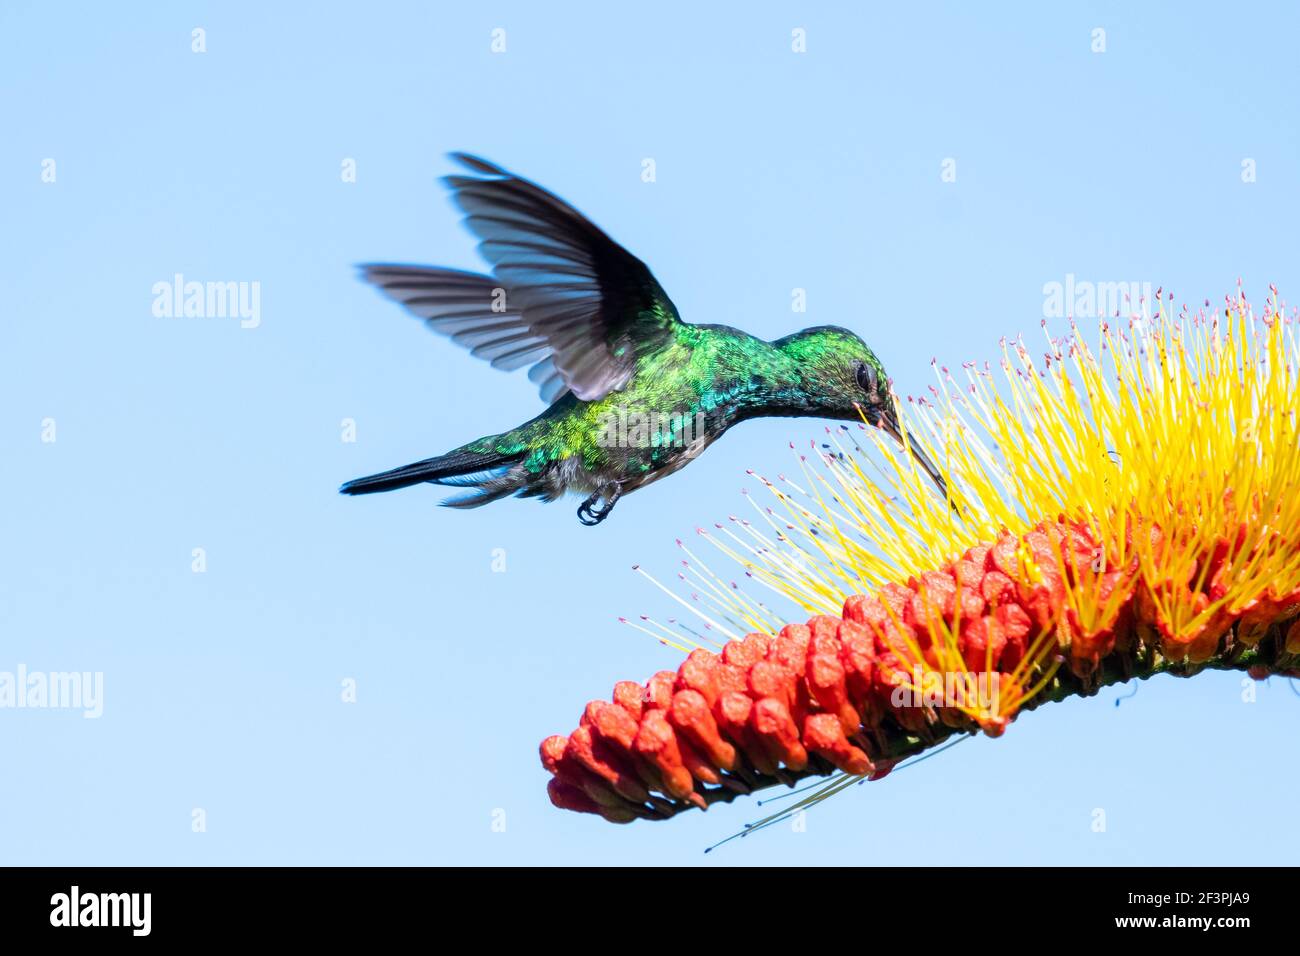 A Blue-chinned Sapphire hummingbird (Chlorestes notata) feeding on the Combretum flower with a blue background. Hummingbird and flower. Bird in flight Stock Photo